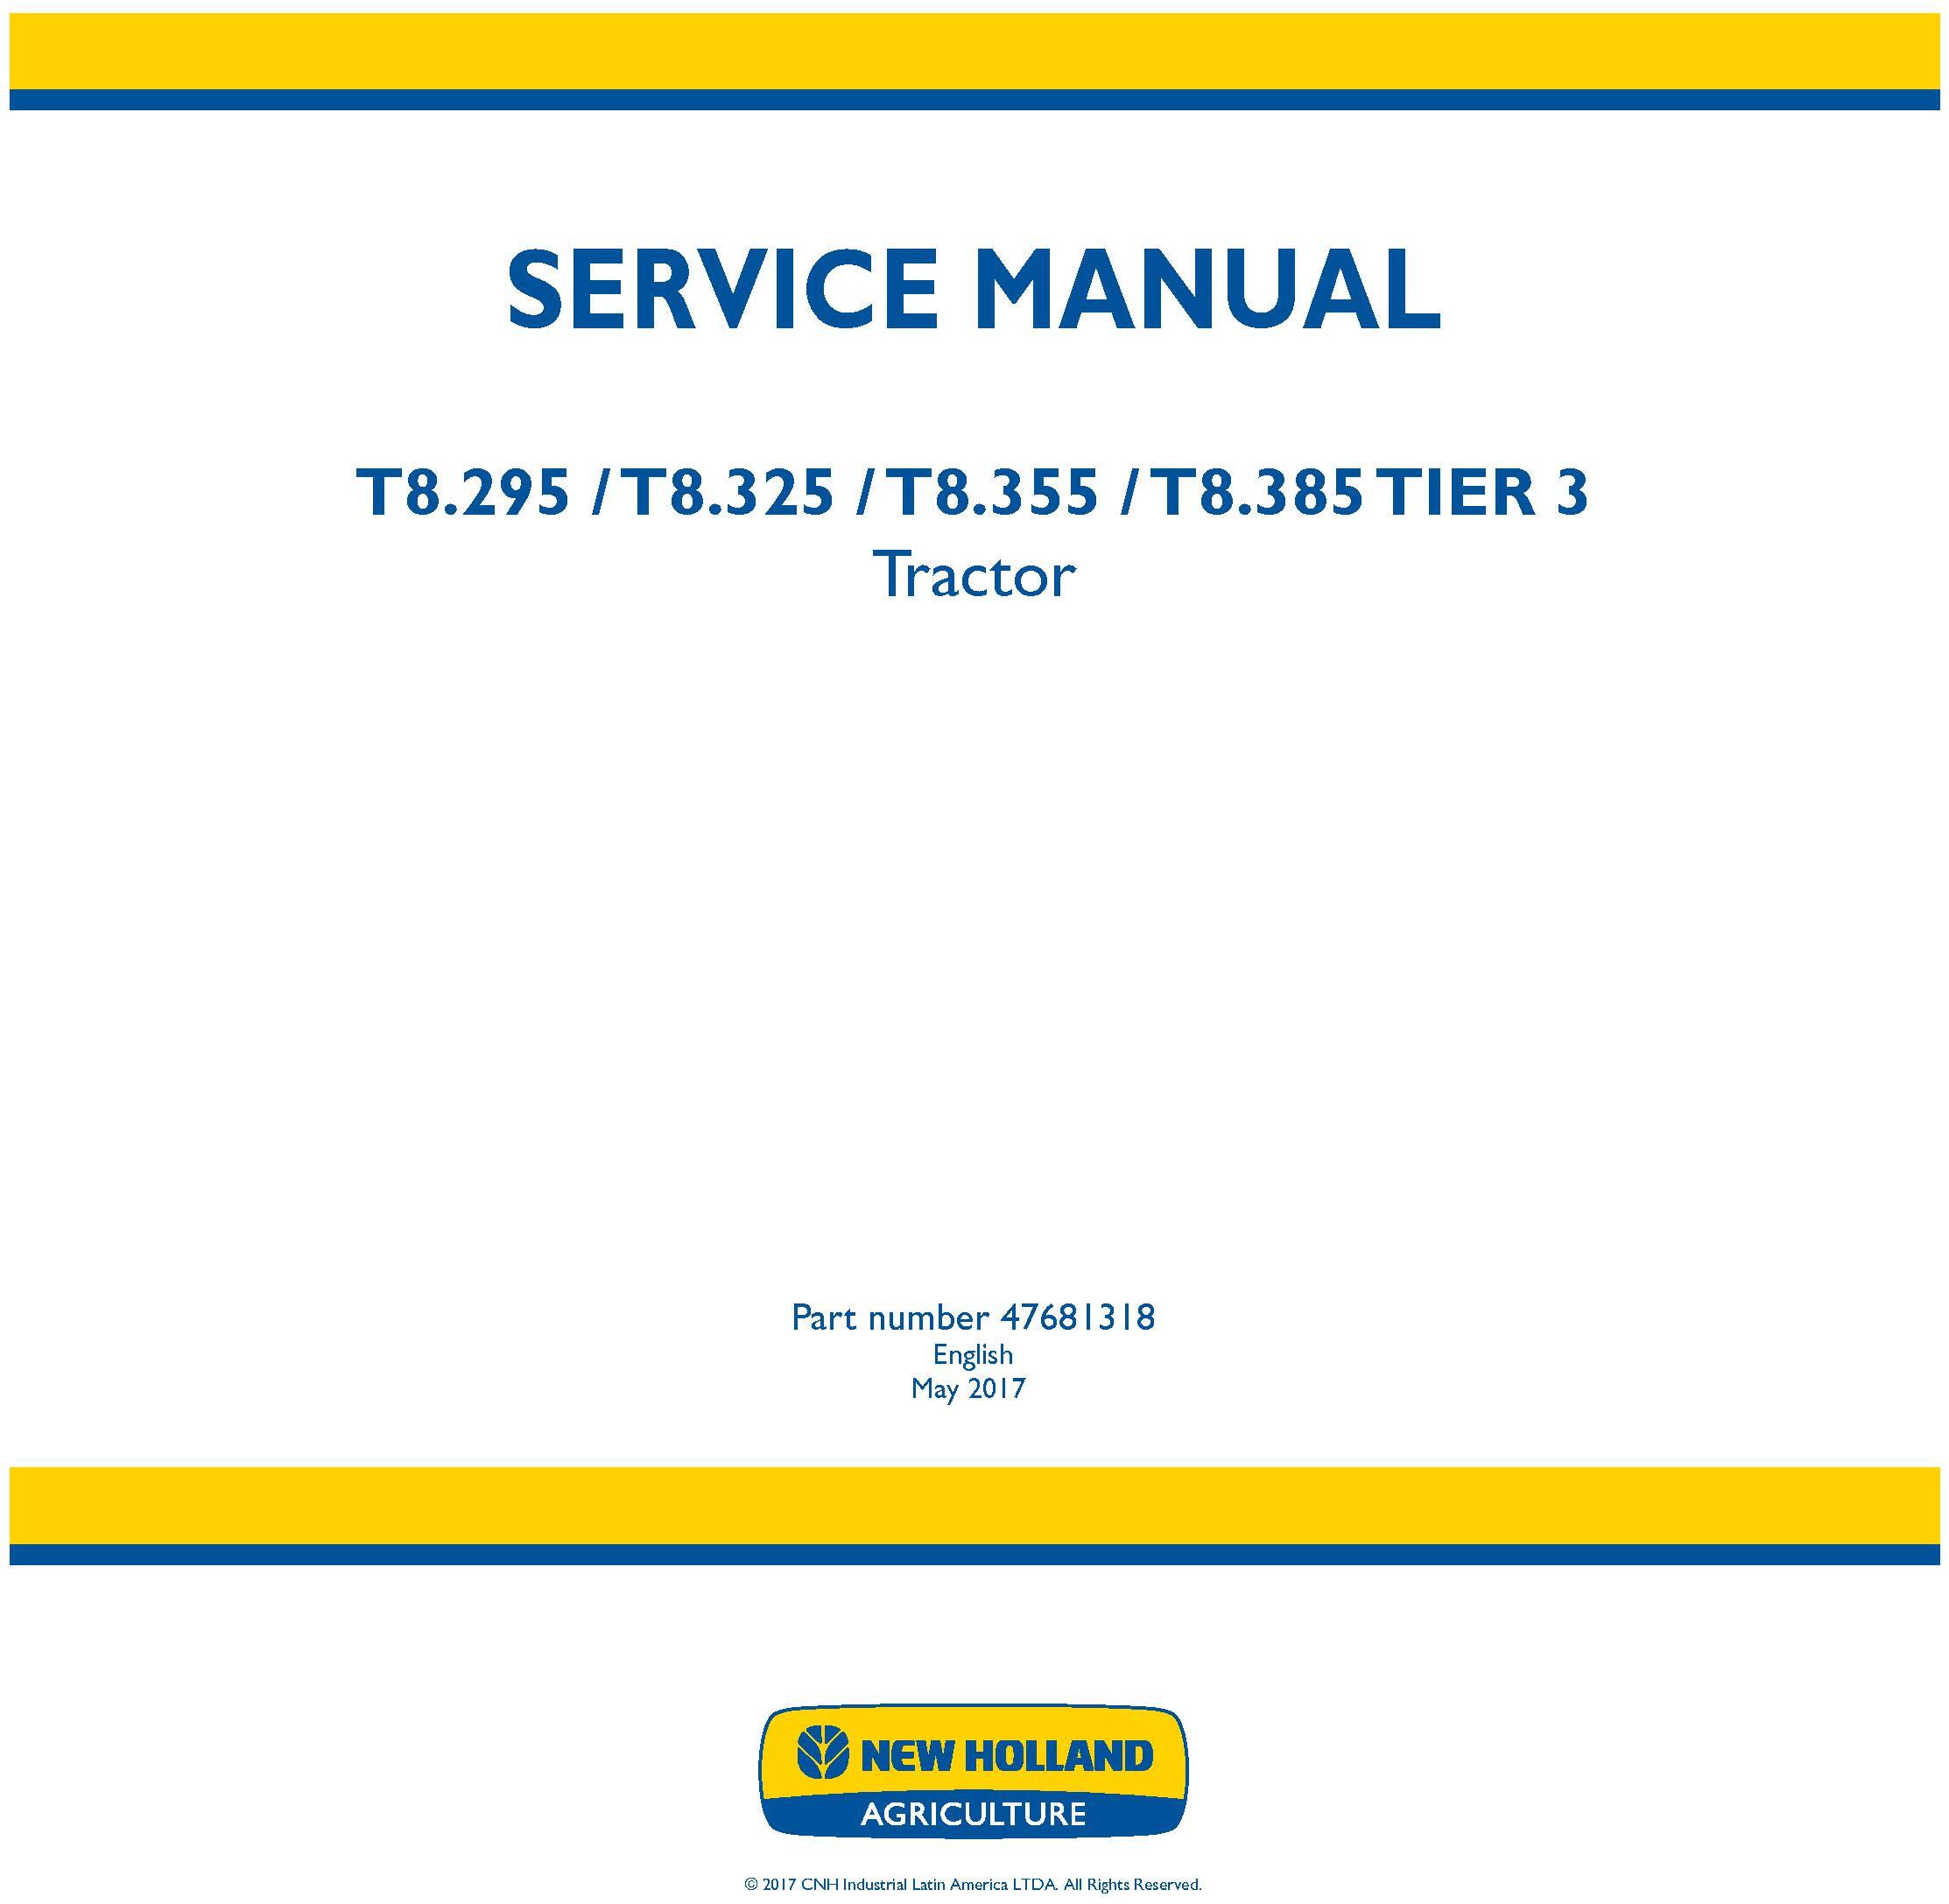 New Holland T8.295, T8.325, T8.355, T8.385 Tier 3 Tractor Service Manual (Latin America) - 19400